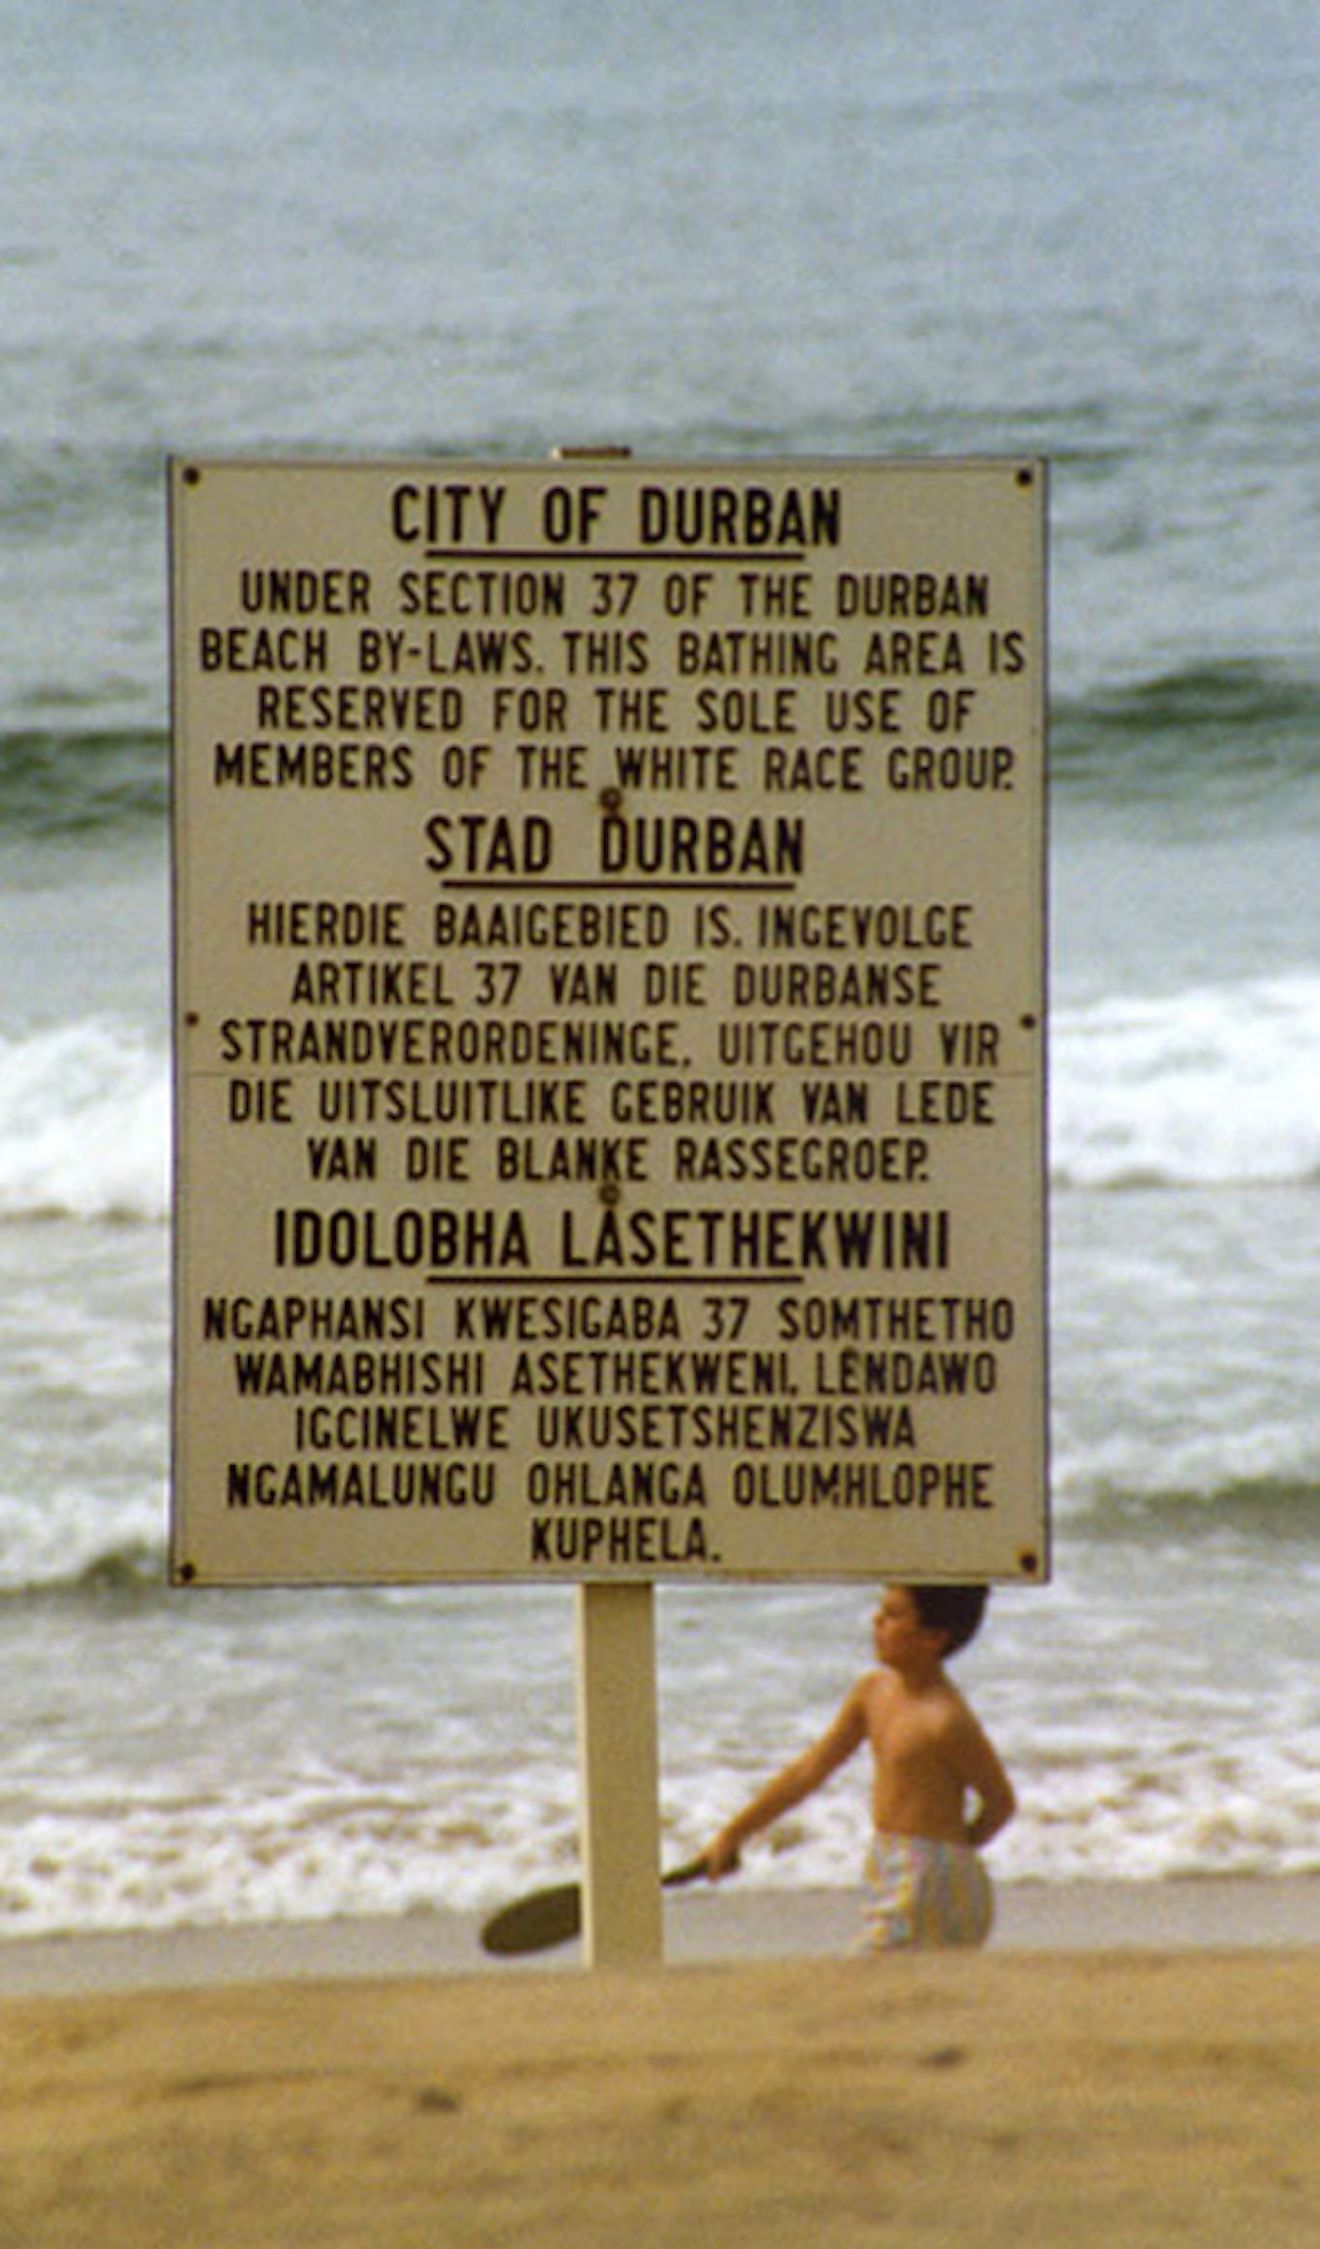 A sign reserving a Natal beach "for the sole use of members of the white race group" during the Apartheid era, in English, Afrikaans, and Zulu. Image credit: Guinnog/Wikimedia.org